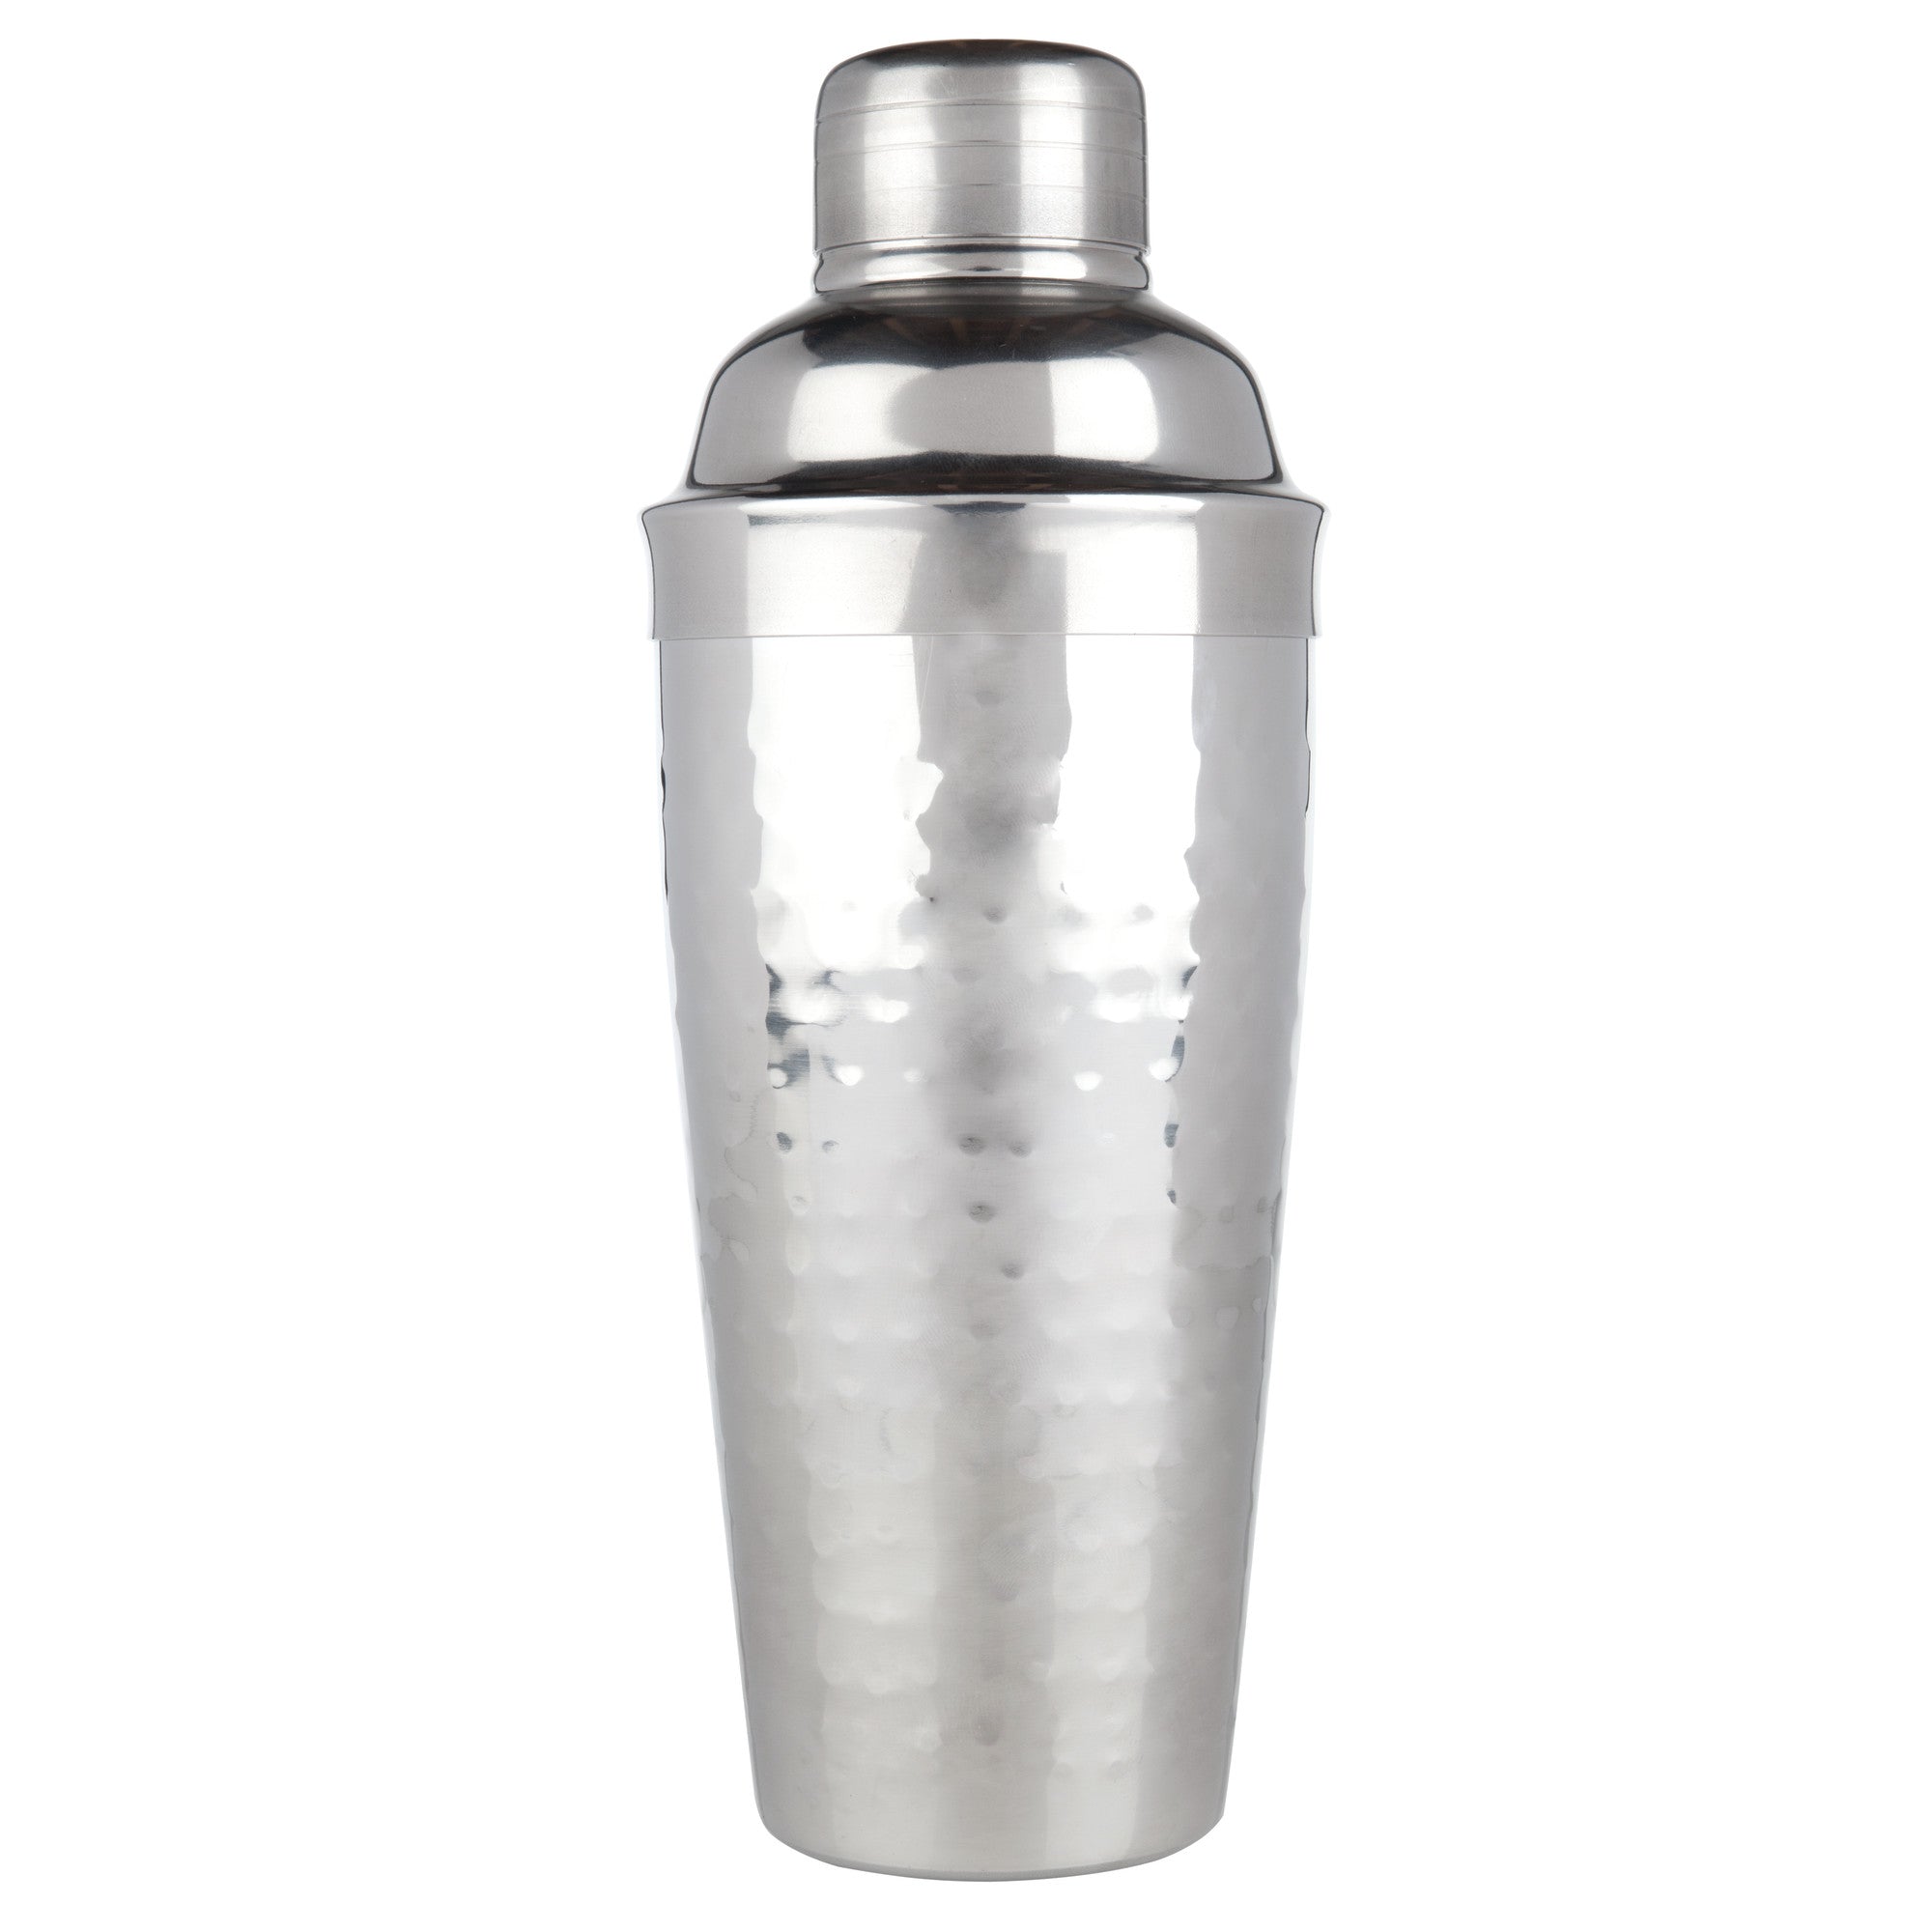 Stainless-Steel Hammered Cocktail Shaker